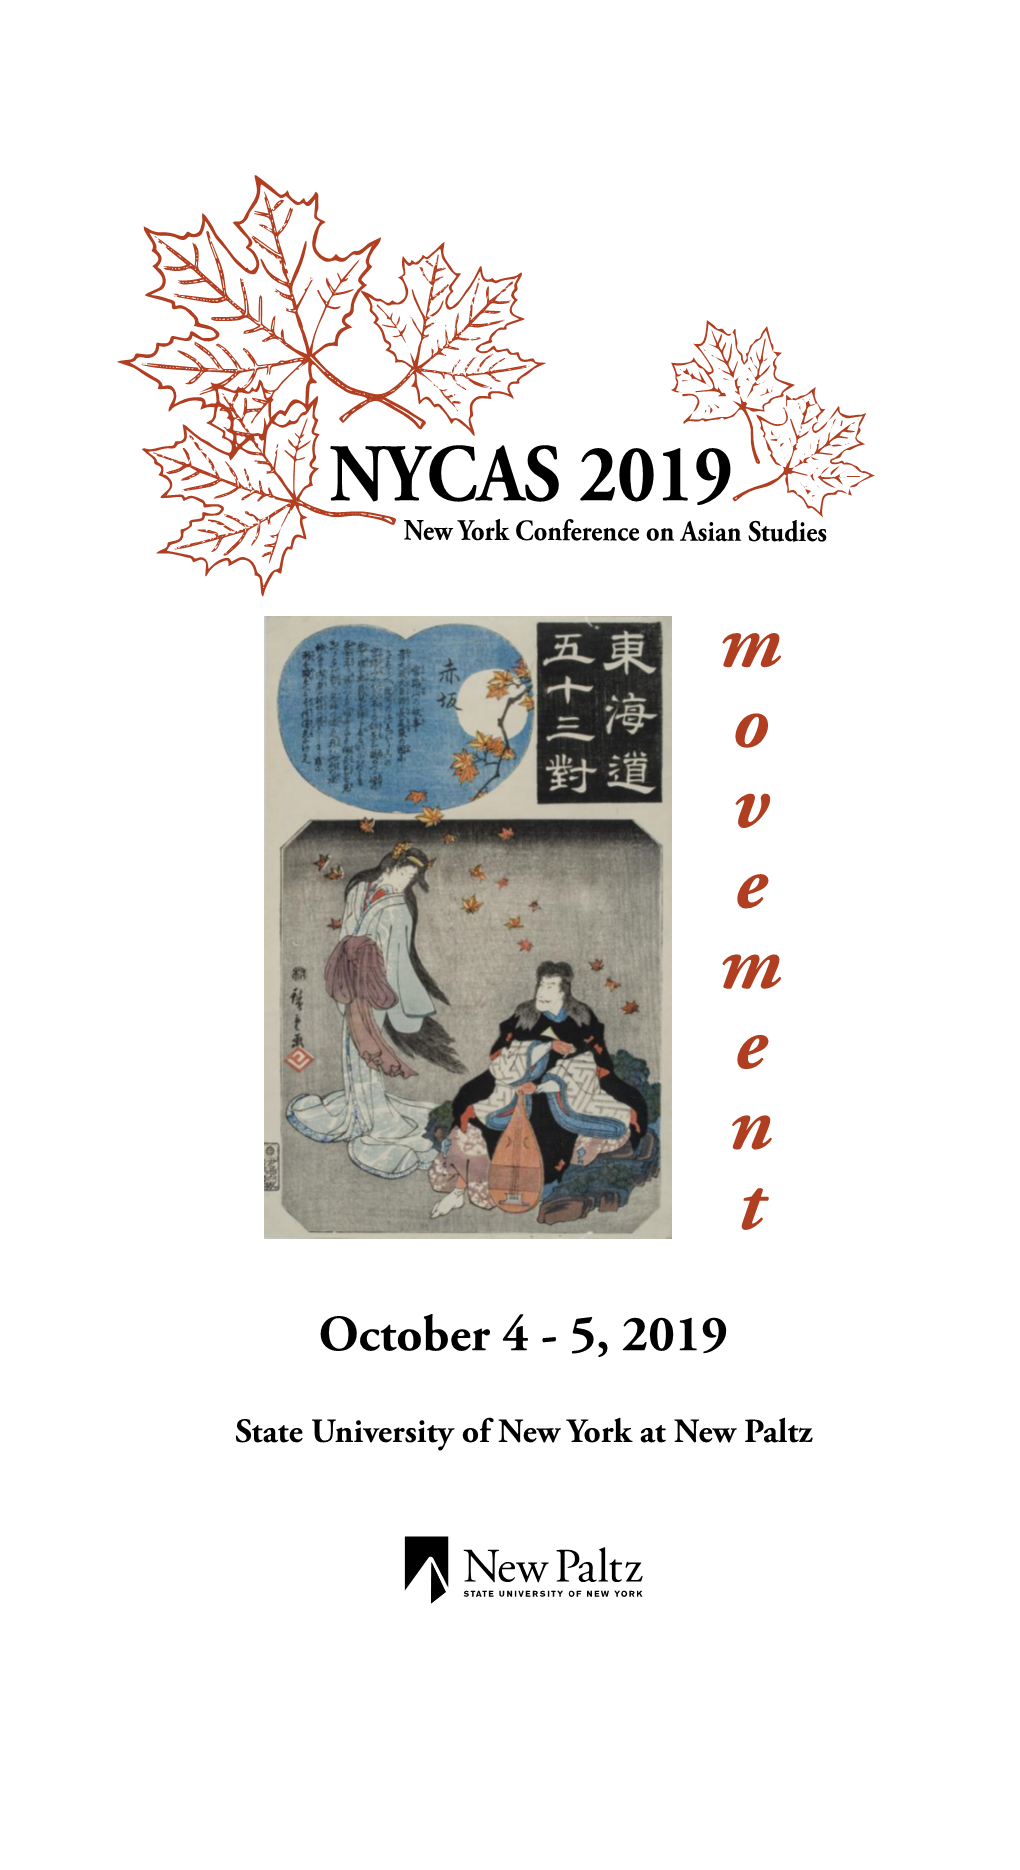 NYCAS 2019 Conference Program